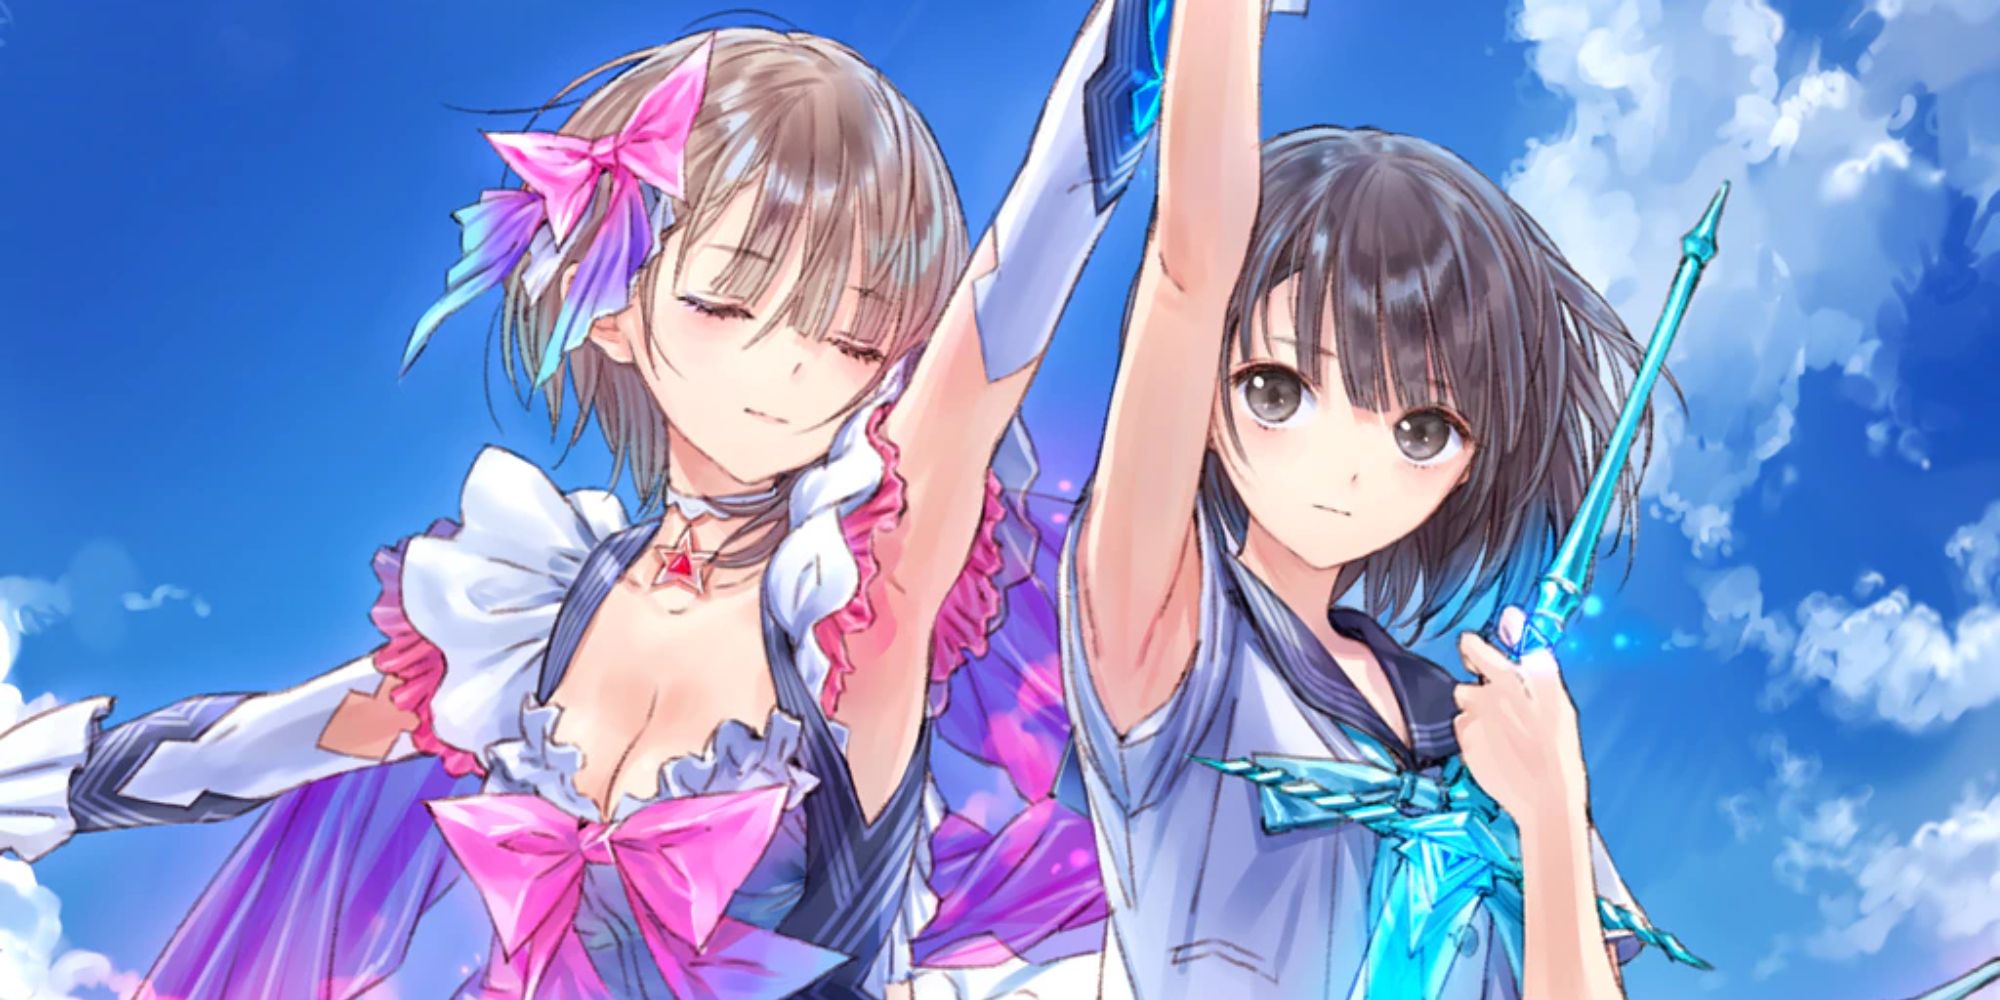 cover art for the game Blue Reflection featuring the game's protagonist Hinako in both of her forms against a cloudy sky background